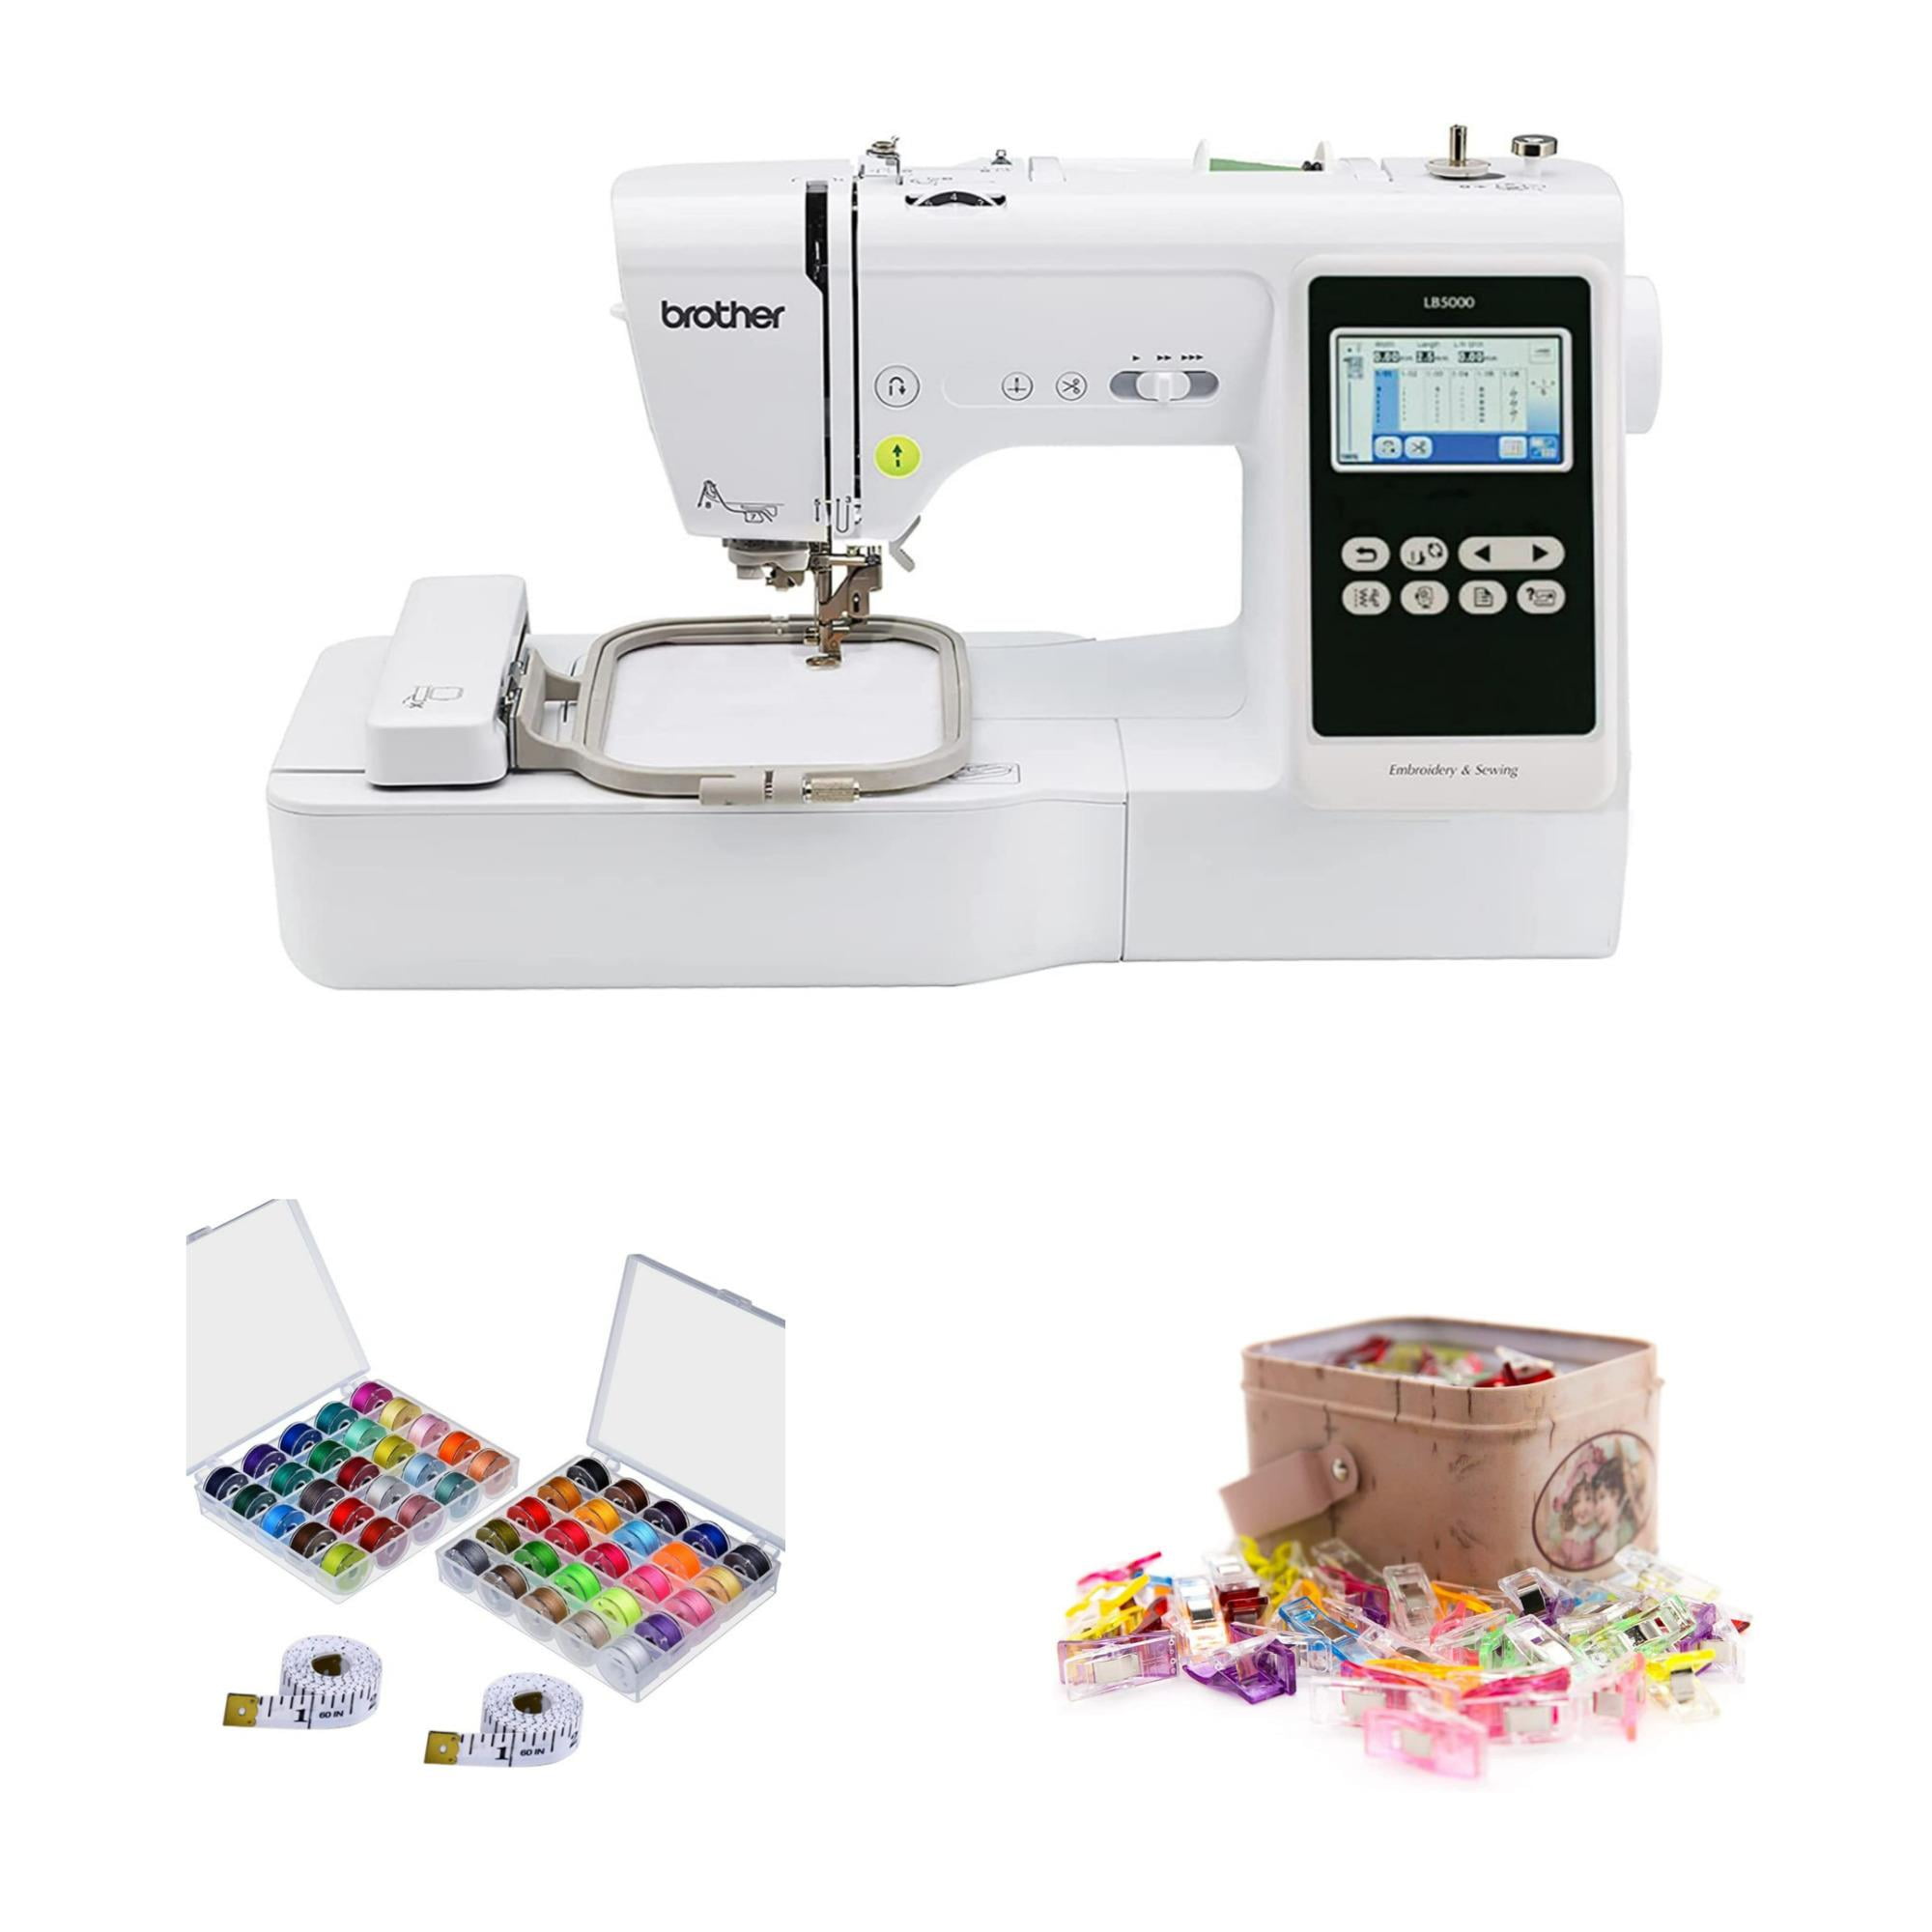 Brother LB5000 Sewing and Embroidery Machine, 80 Argentina